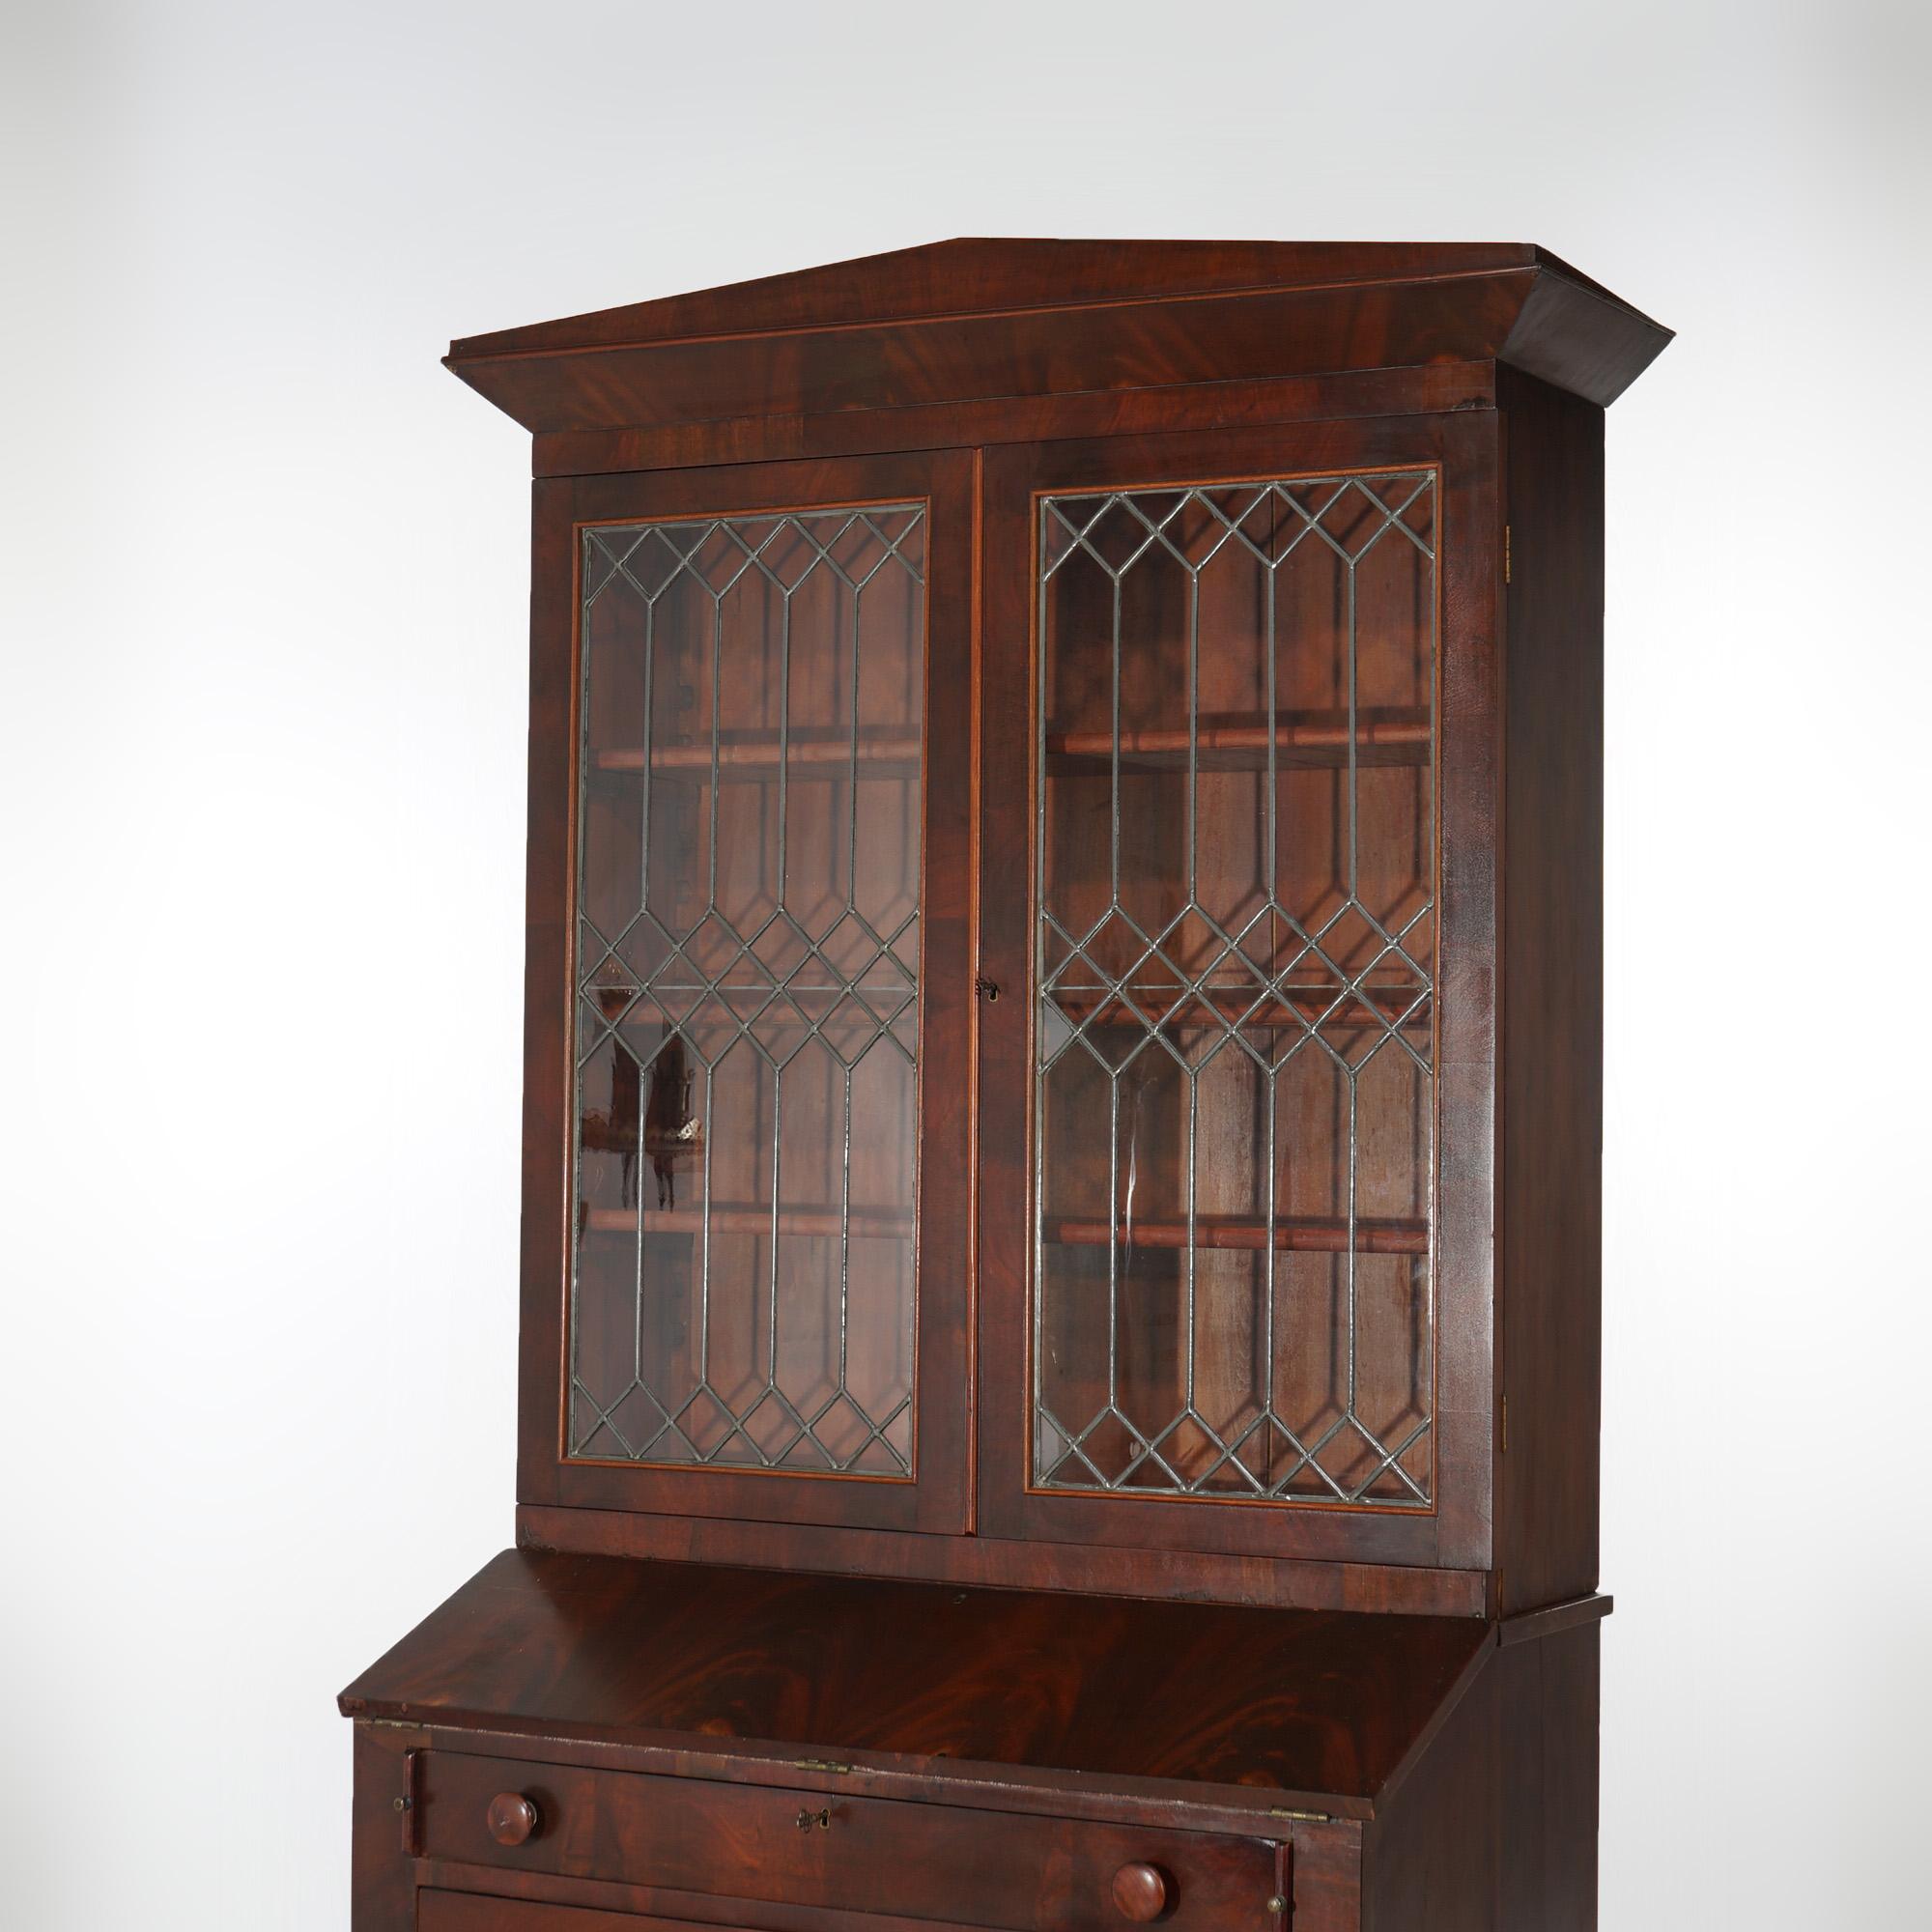 19th Century Antique American Empire Flame Mahogany Secretary Desk With Leaded Glass c1840 For Sale